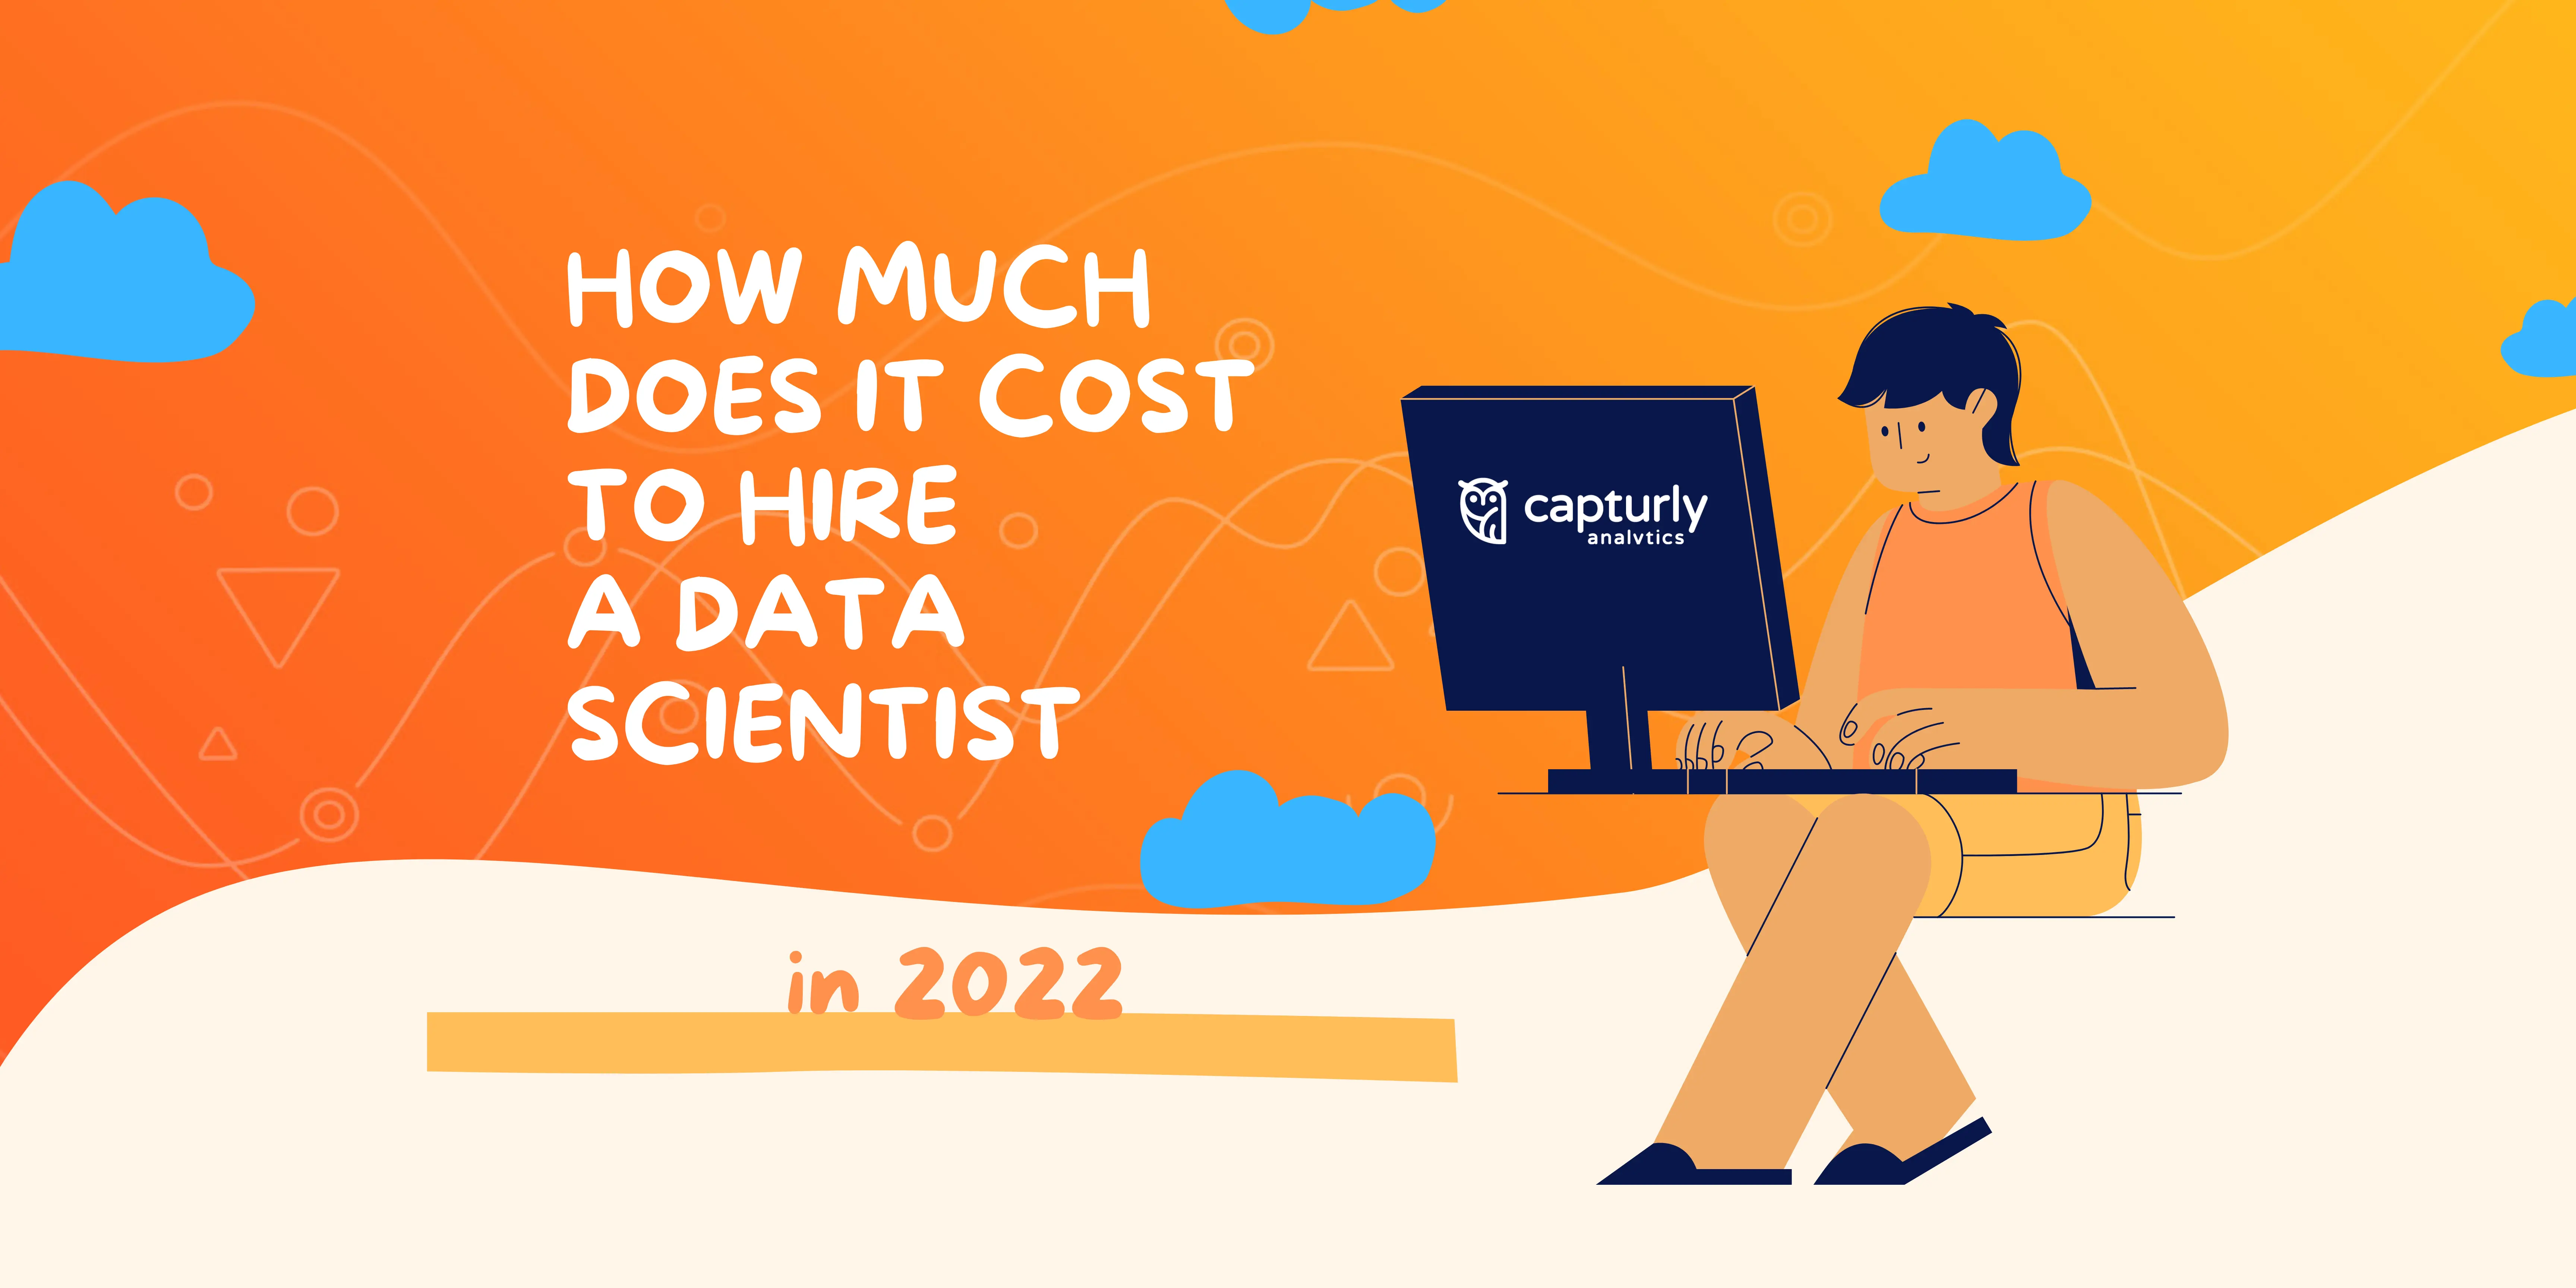 How Much Does it Cost to Hire a Data Scientist in 2022